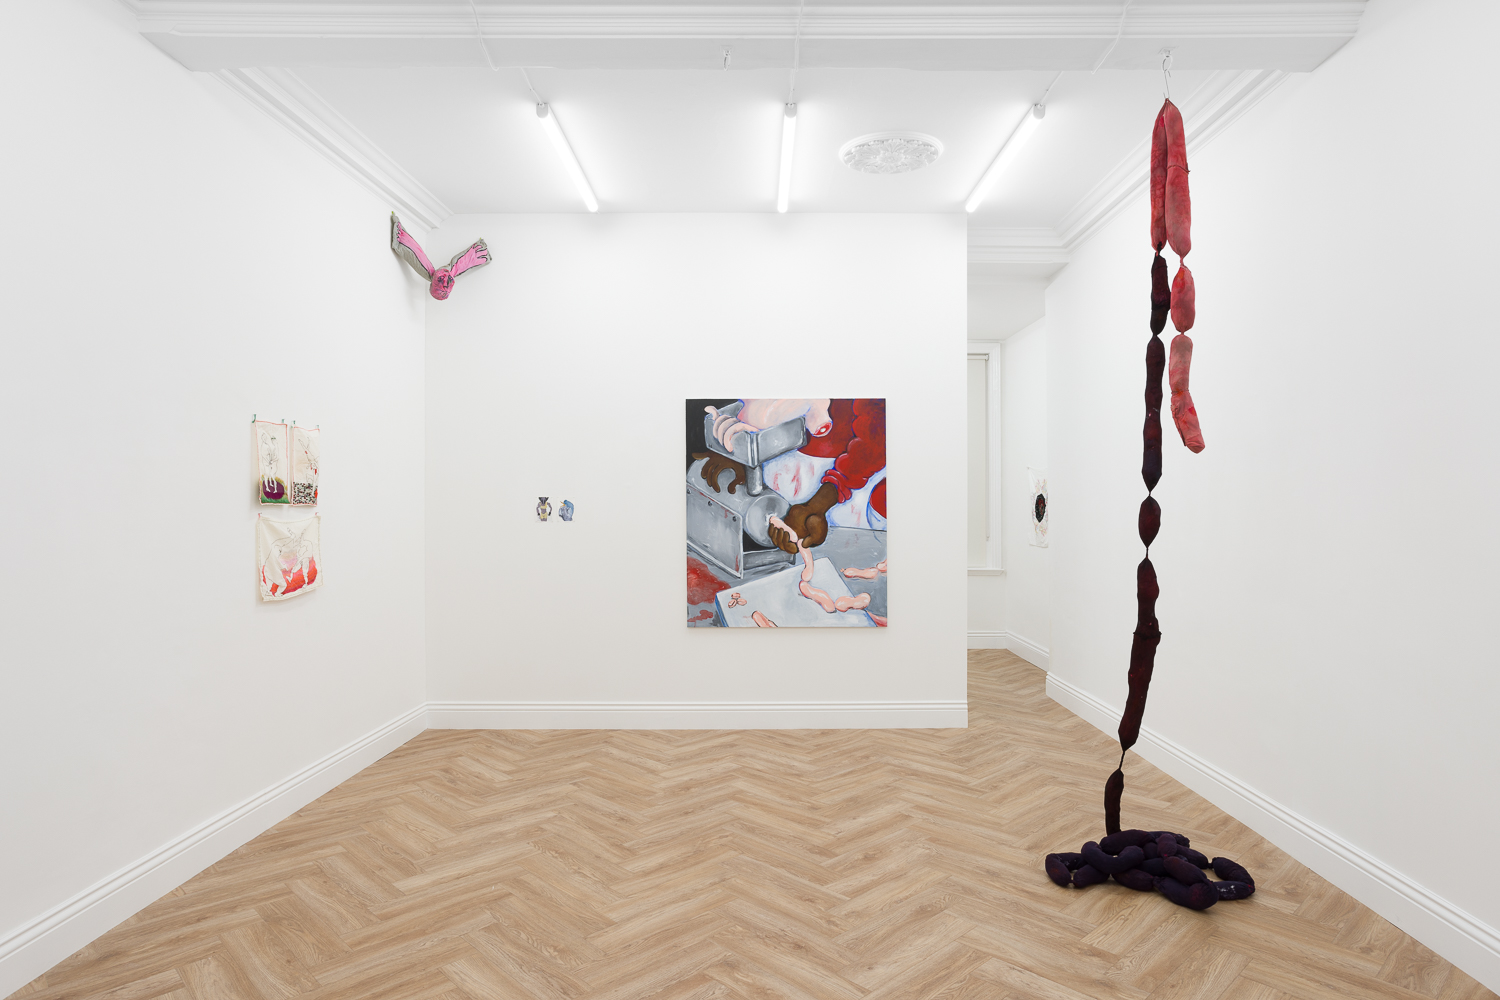 Shir Cohen and Olivia Sterling Rage Comics at Huxley-Parlour Gallery 45 Maddox St London W1S 2PE